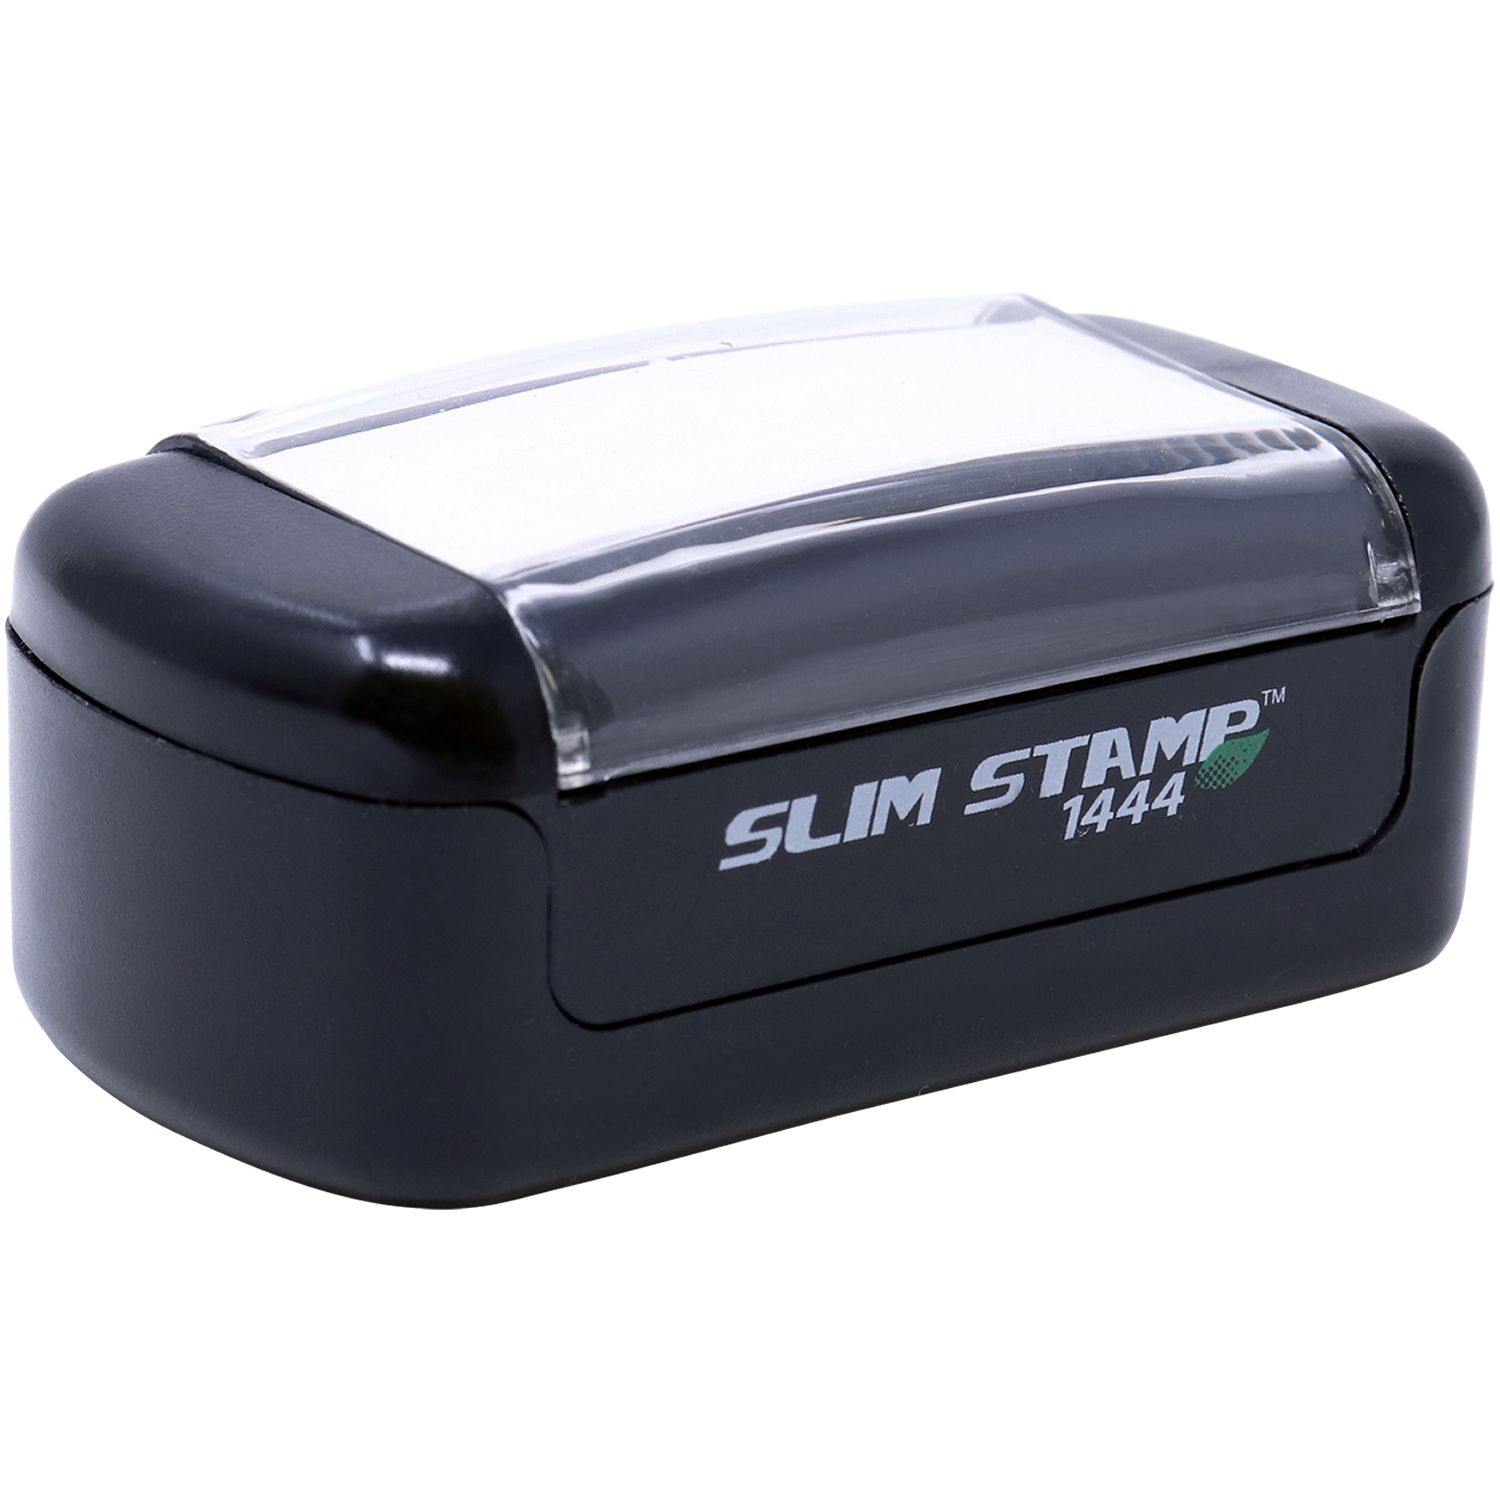 Alt View of Slim Pre-Inked Narrow Font First Class Mail Stamp Mount Angle